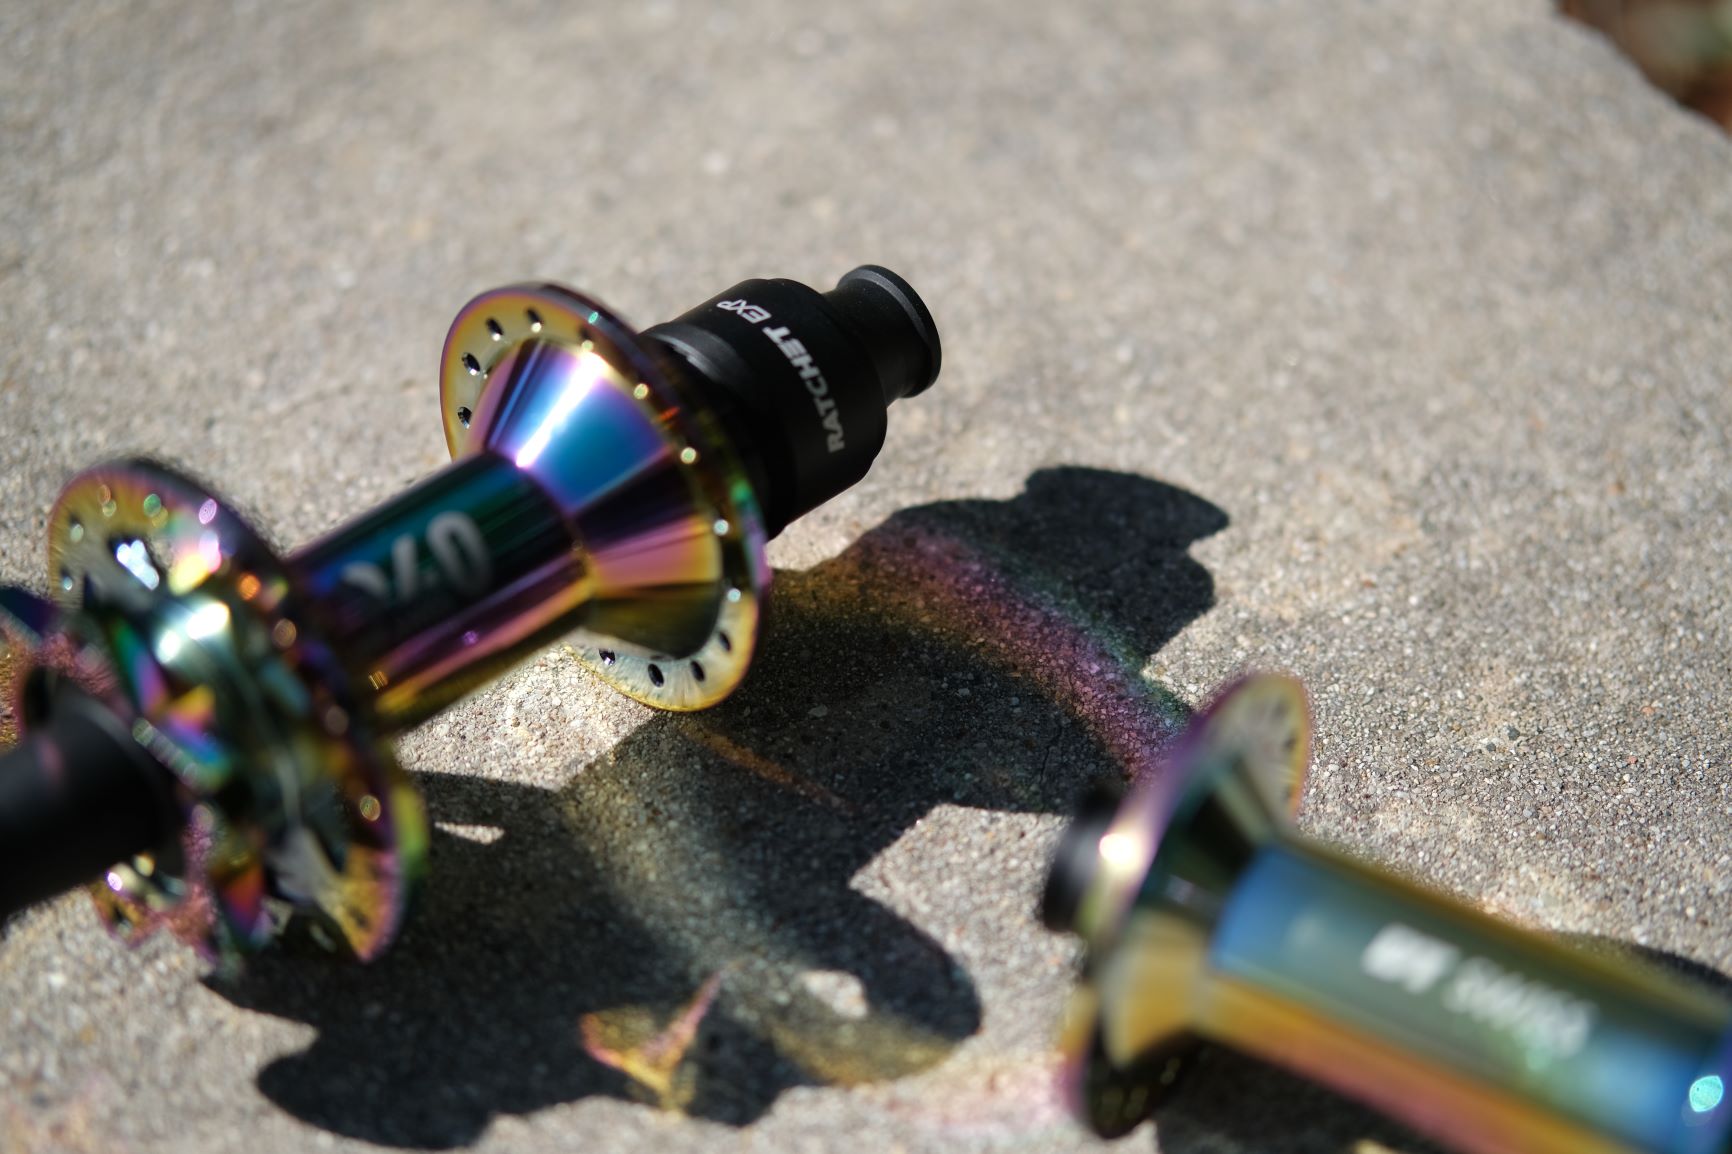 A pair of DT Swiss oil-slick hubs throw a rainbow onto the ground